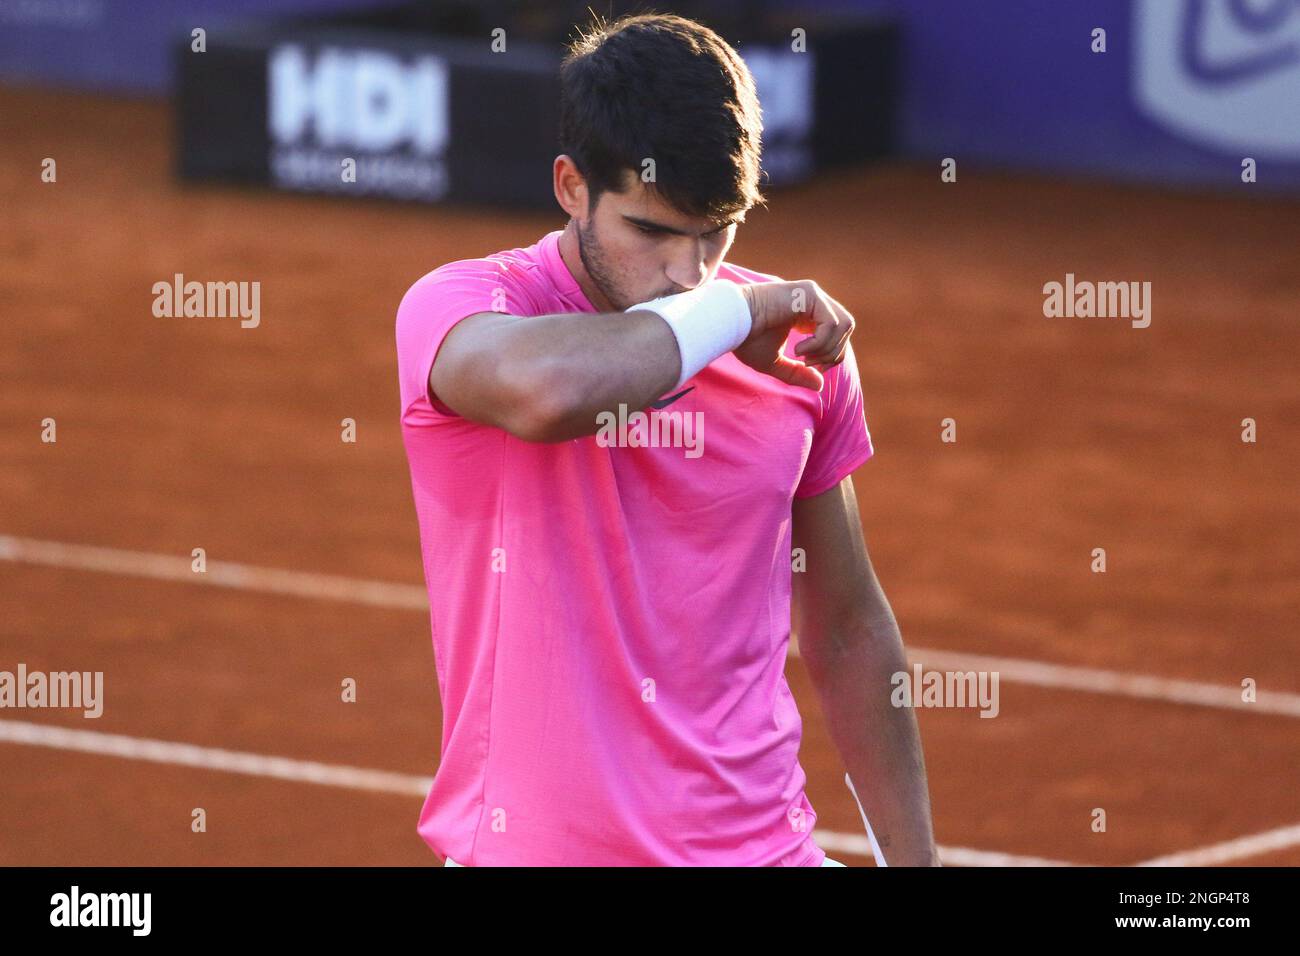 Buenos Aires, Argentina, 18th Feb 2023, Bernabe Zapata Miralles (SPA) during a semifinal match of Argentina Open ATP 250 at Central Court of Buenos Aires Lawn Tennis Club